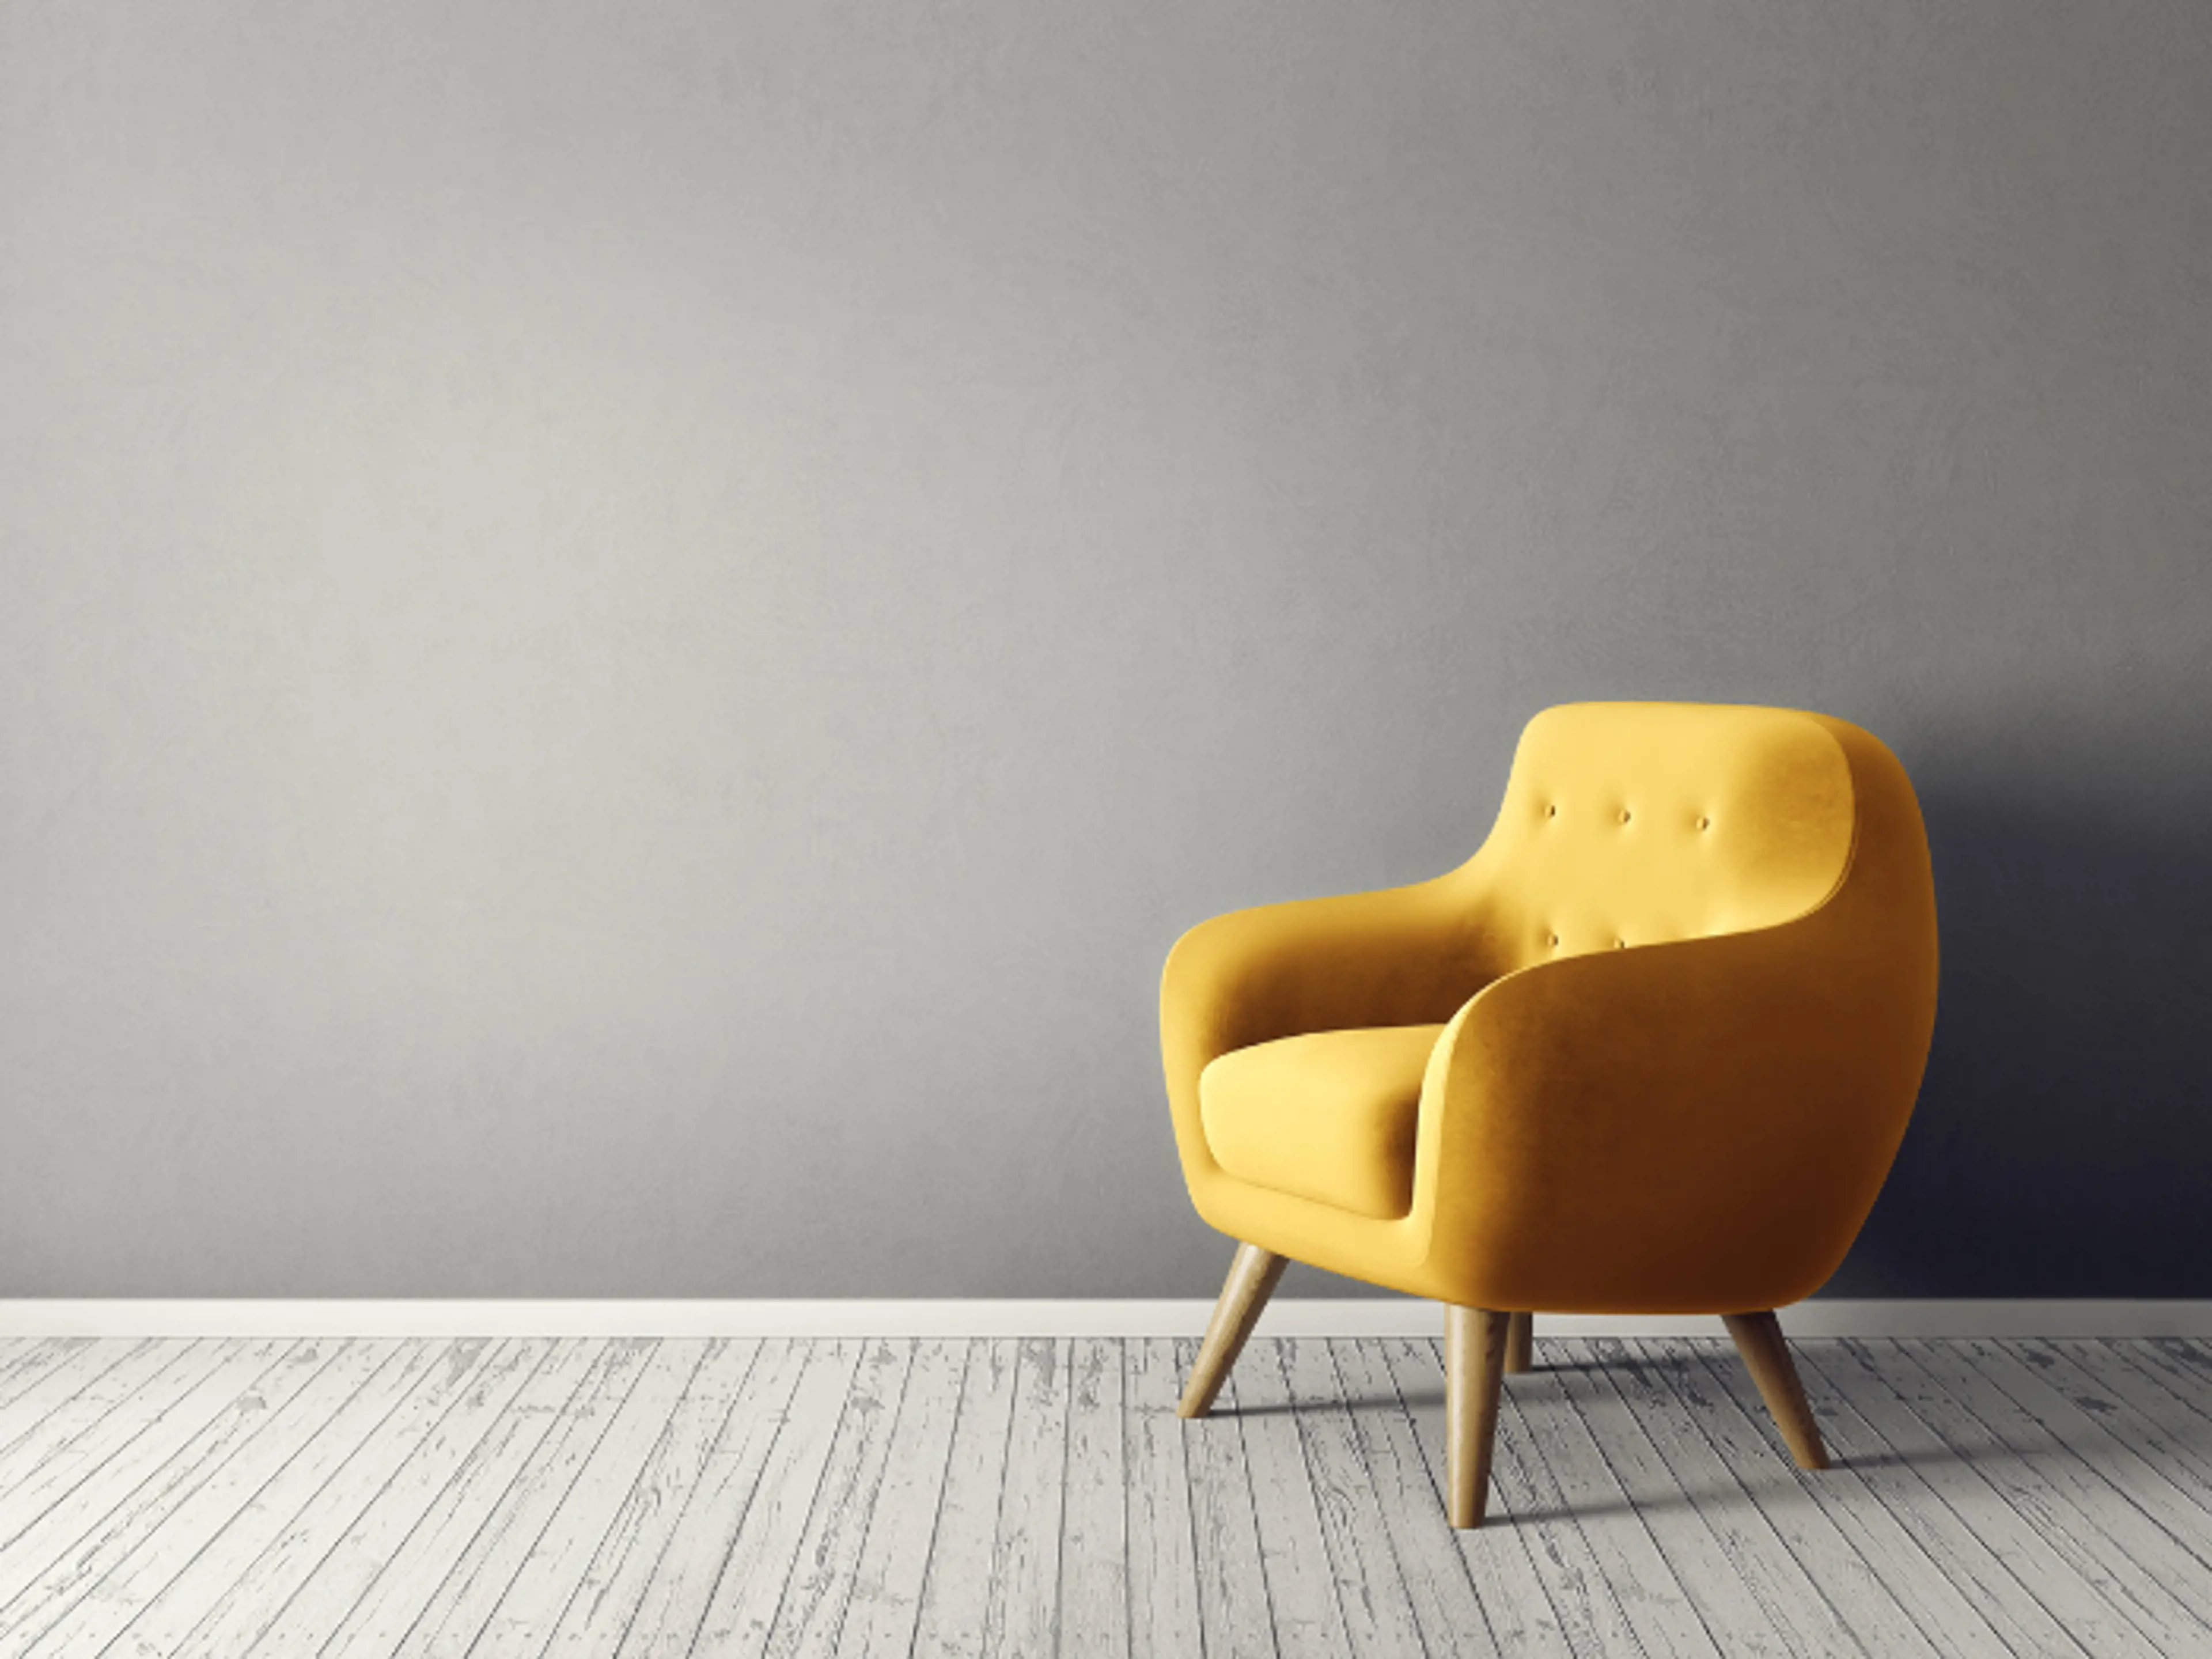 Yellow arm chair standing in a room